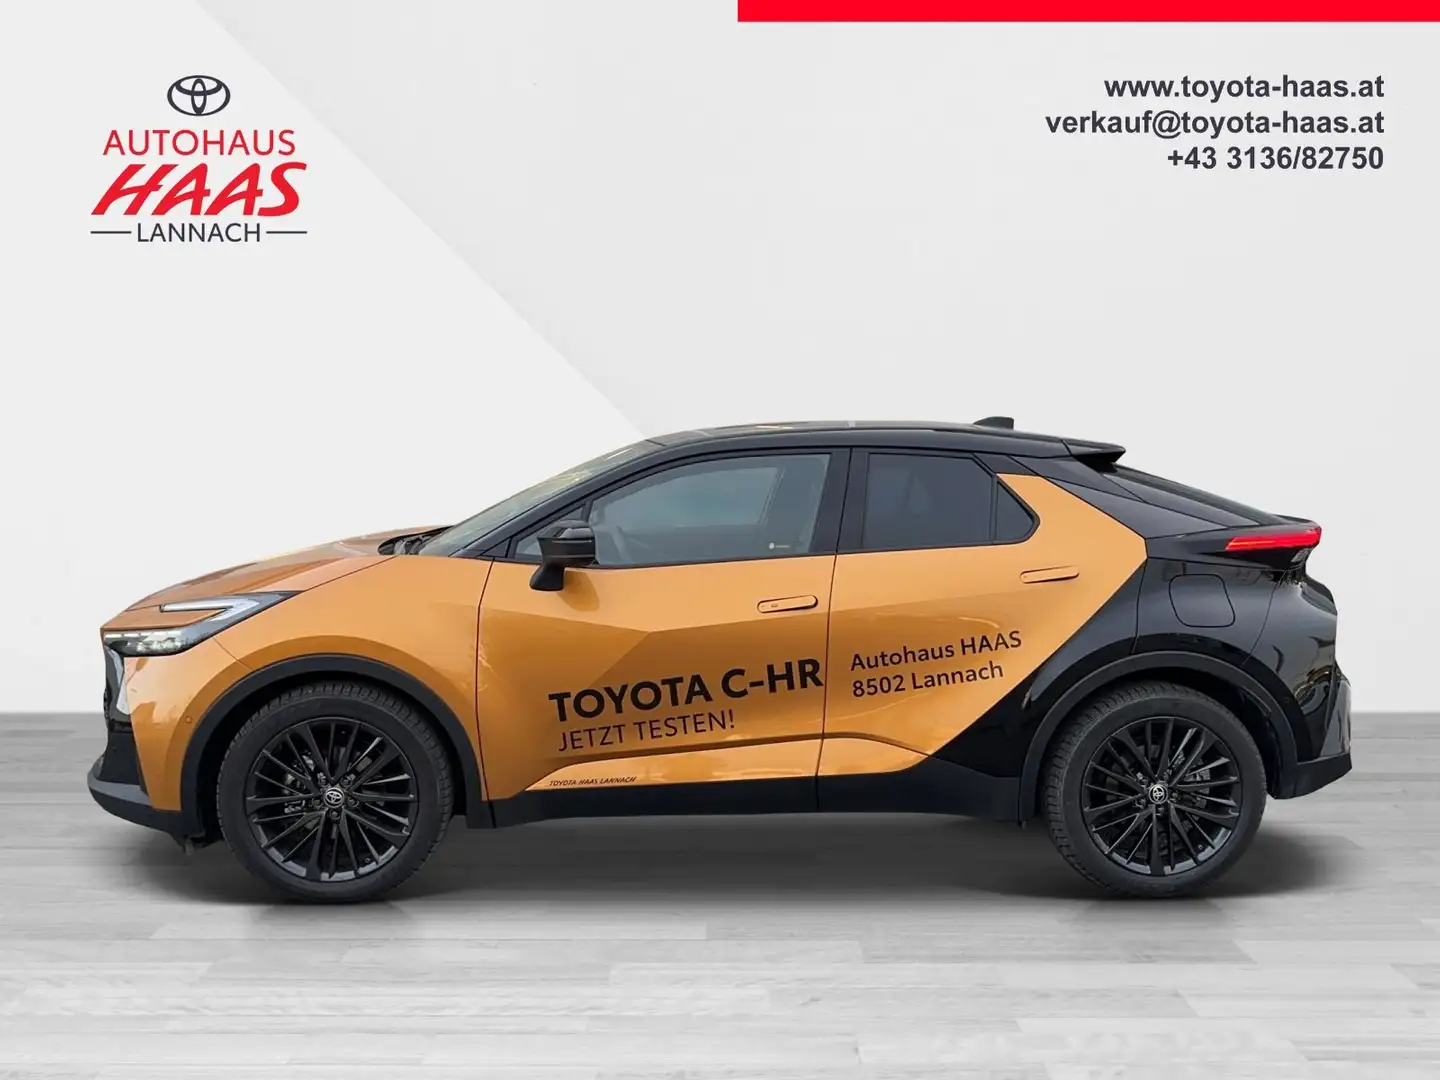 Toyota C-HR 2,0 Hybrid Lounge Premiere Edition + Panoramadach Or - 2